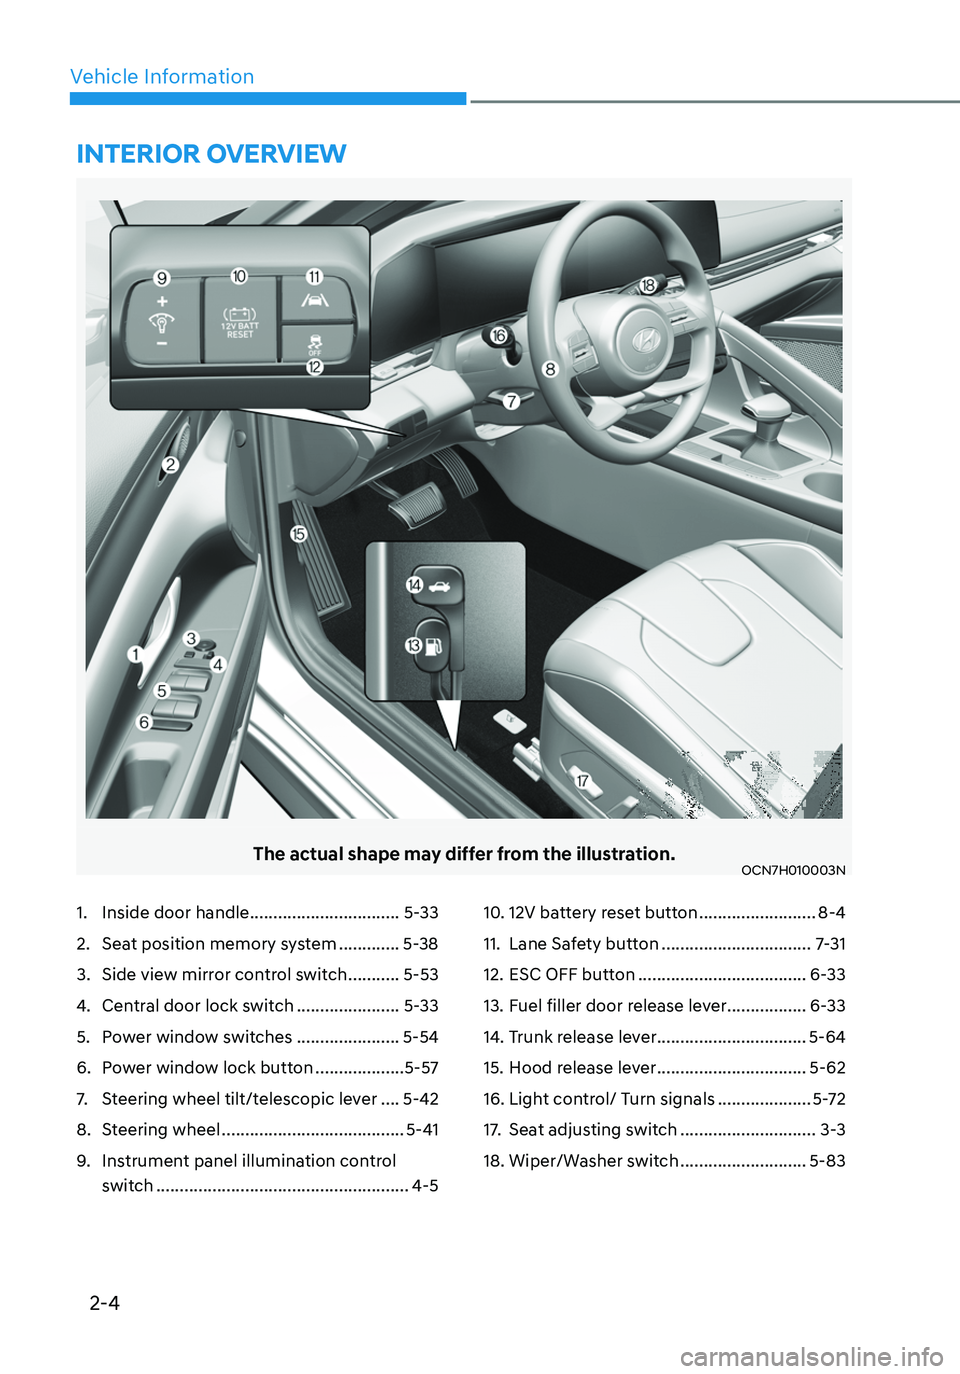 HYUNDAI ELANTRA HYBRID 2021  Owners Manual 2-4
Vehicle Information
The actual shape may differ from the illustration.OCN7H010003N
1. Inside door handle ................................5-33
2. Seat position memory system .............5-38
3. Si